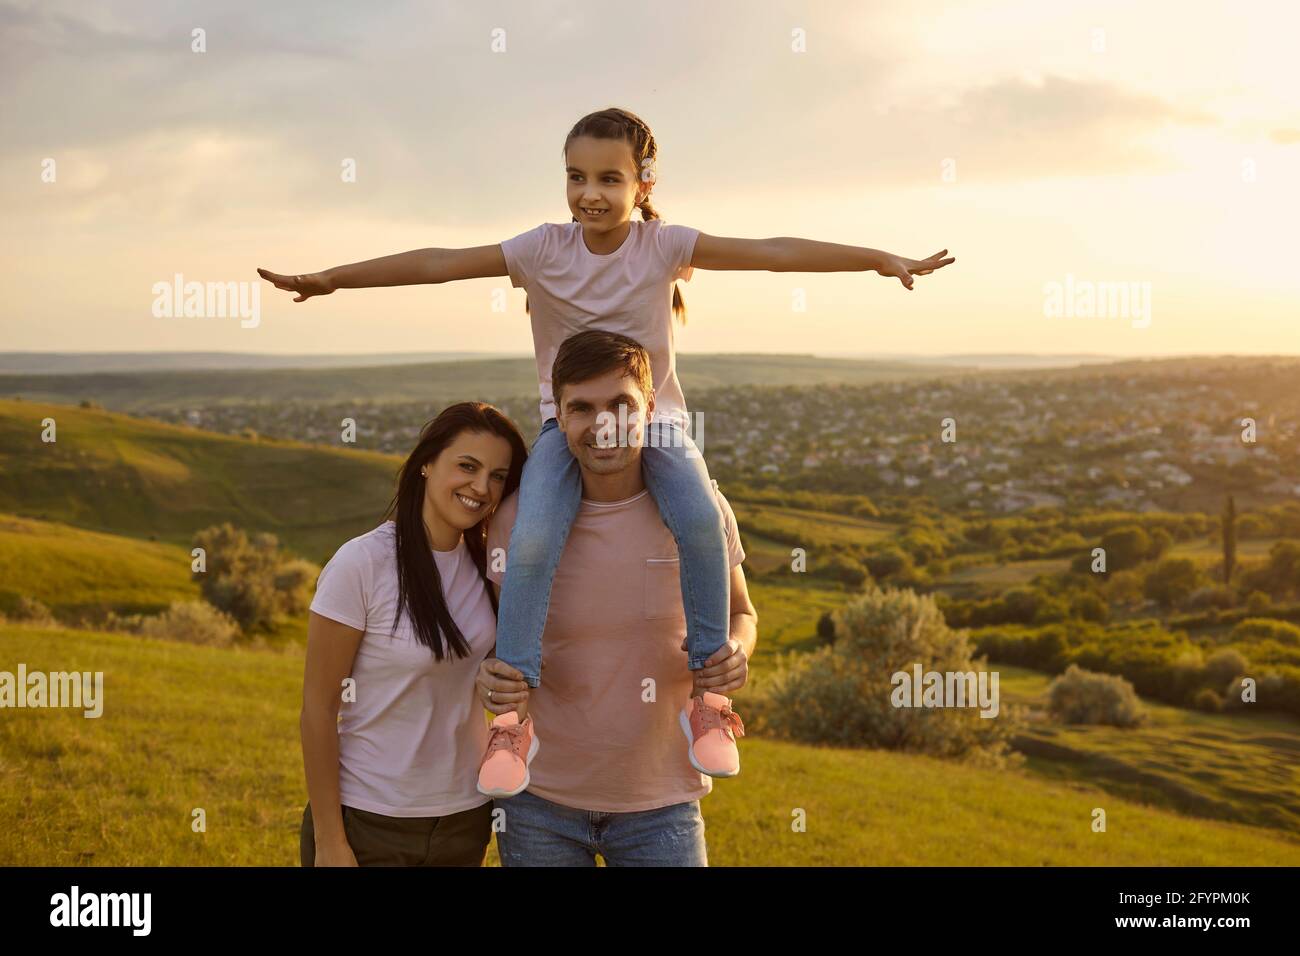 Daughter on the shoulders of parents smiling walk on the grass at sunset in nature. Stock Photo